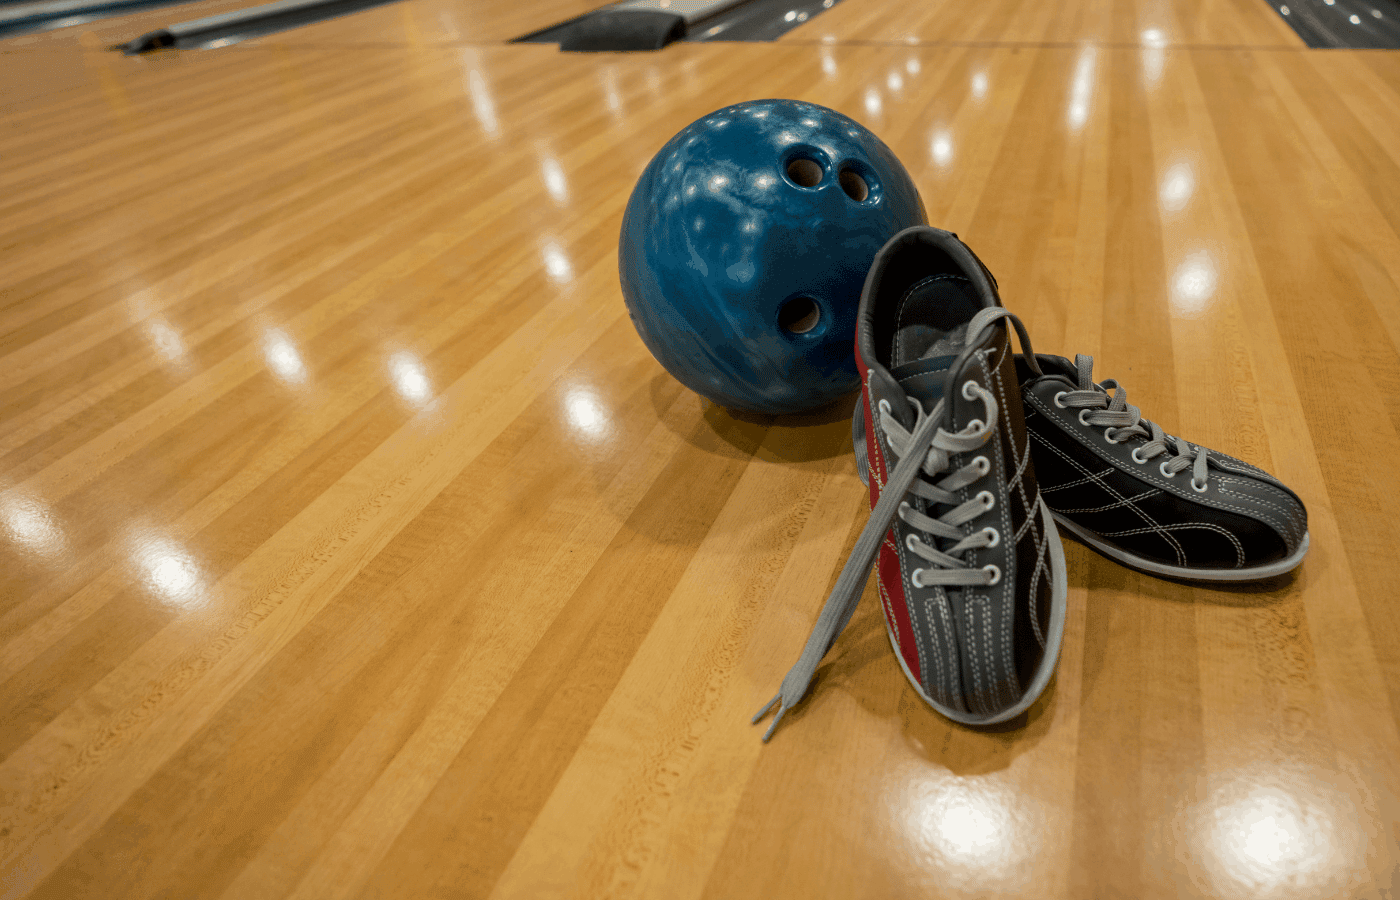 why do bowlers touch their shoes